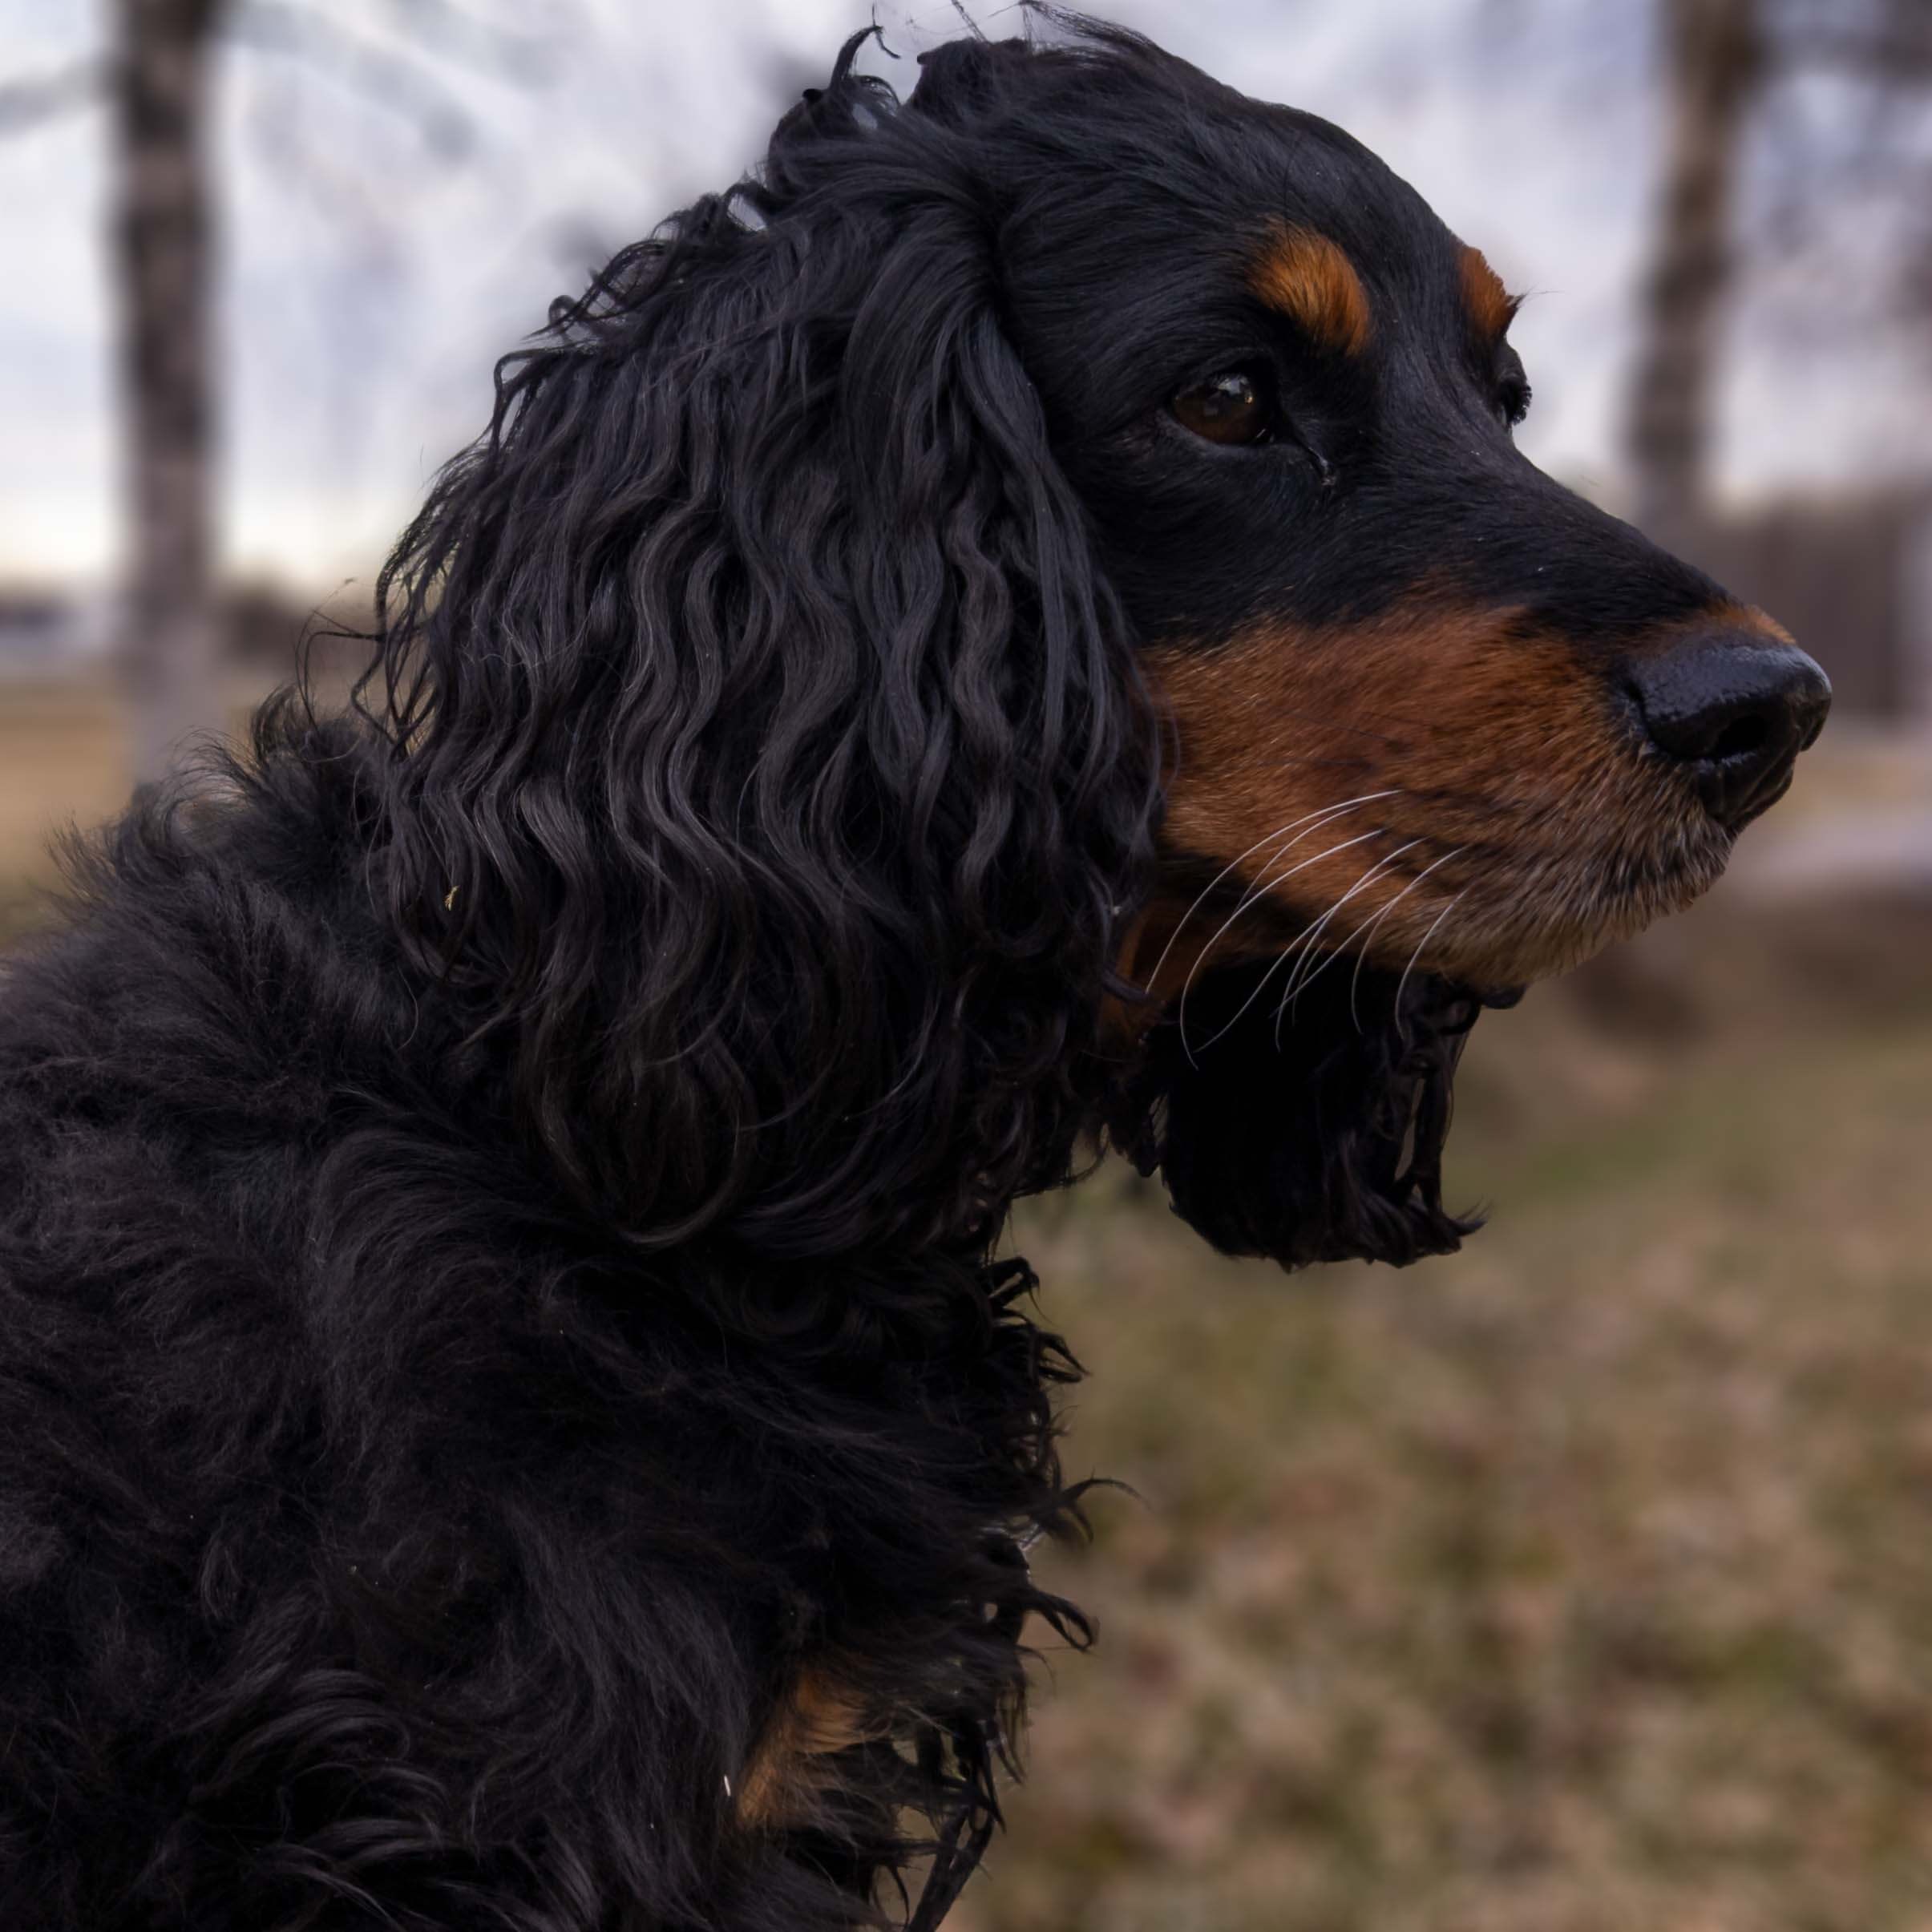 Portrait photo of a mostly black dog with orange nose and eyebrows